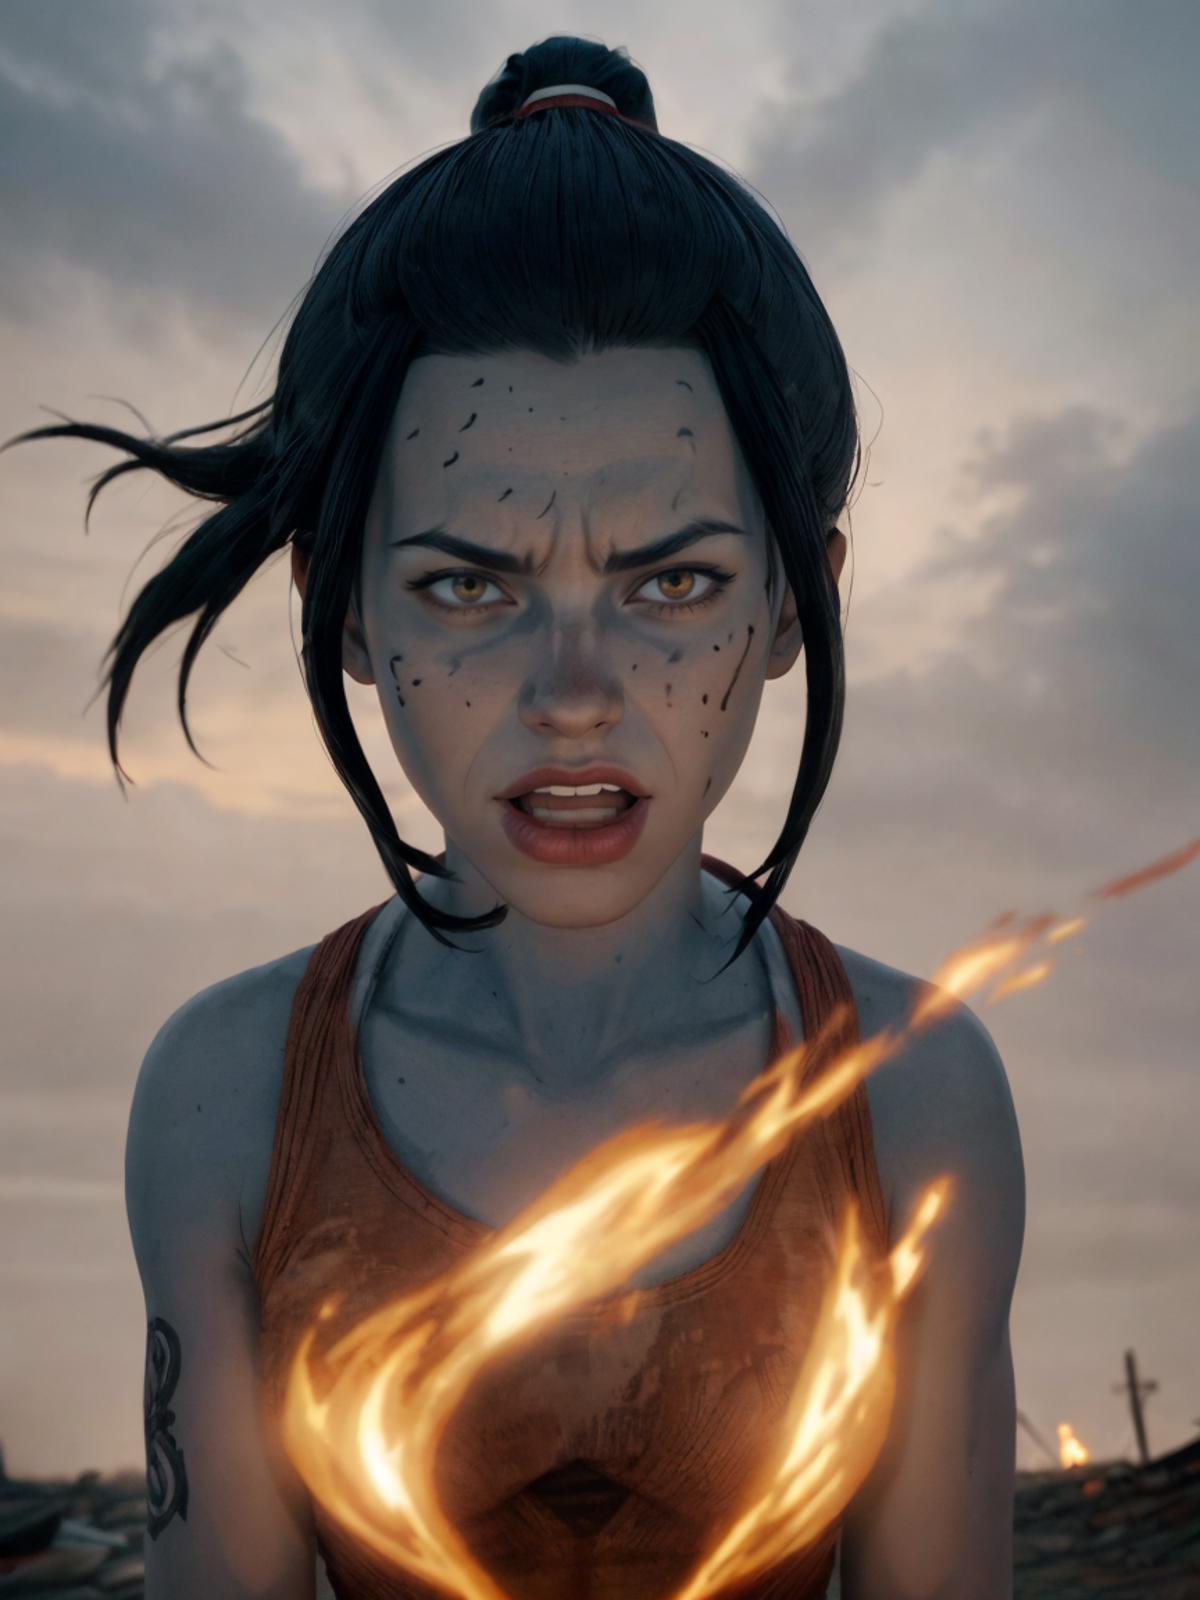 A woman with blue skin, a tattoo, and fire coming out of her mouth.